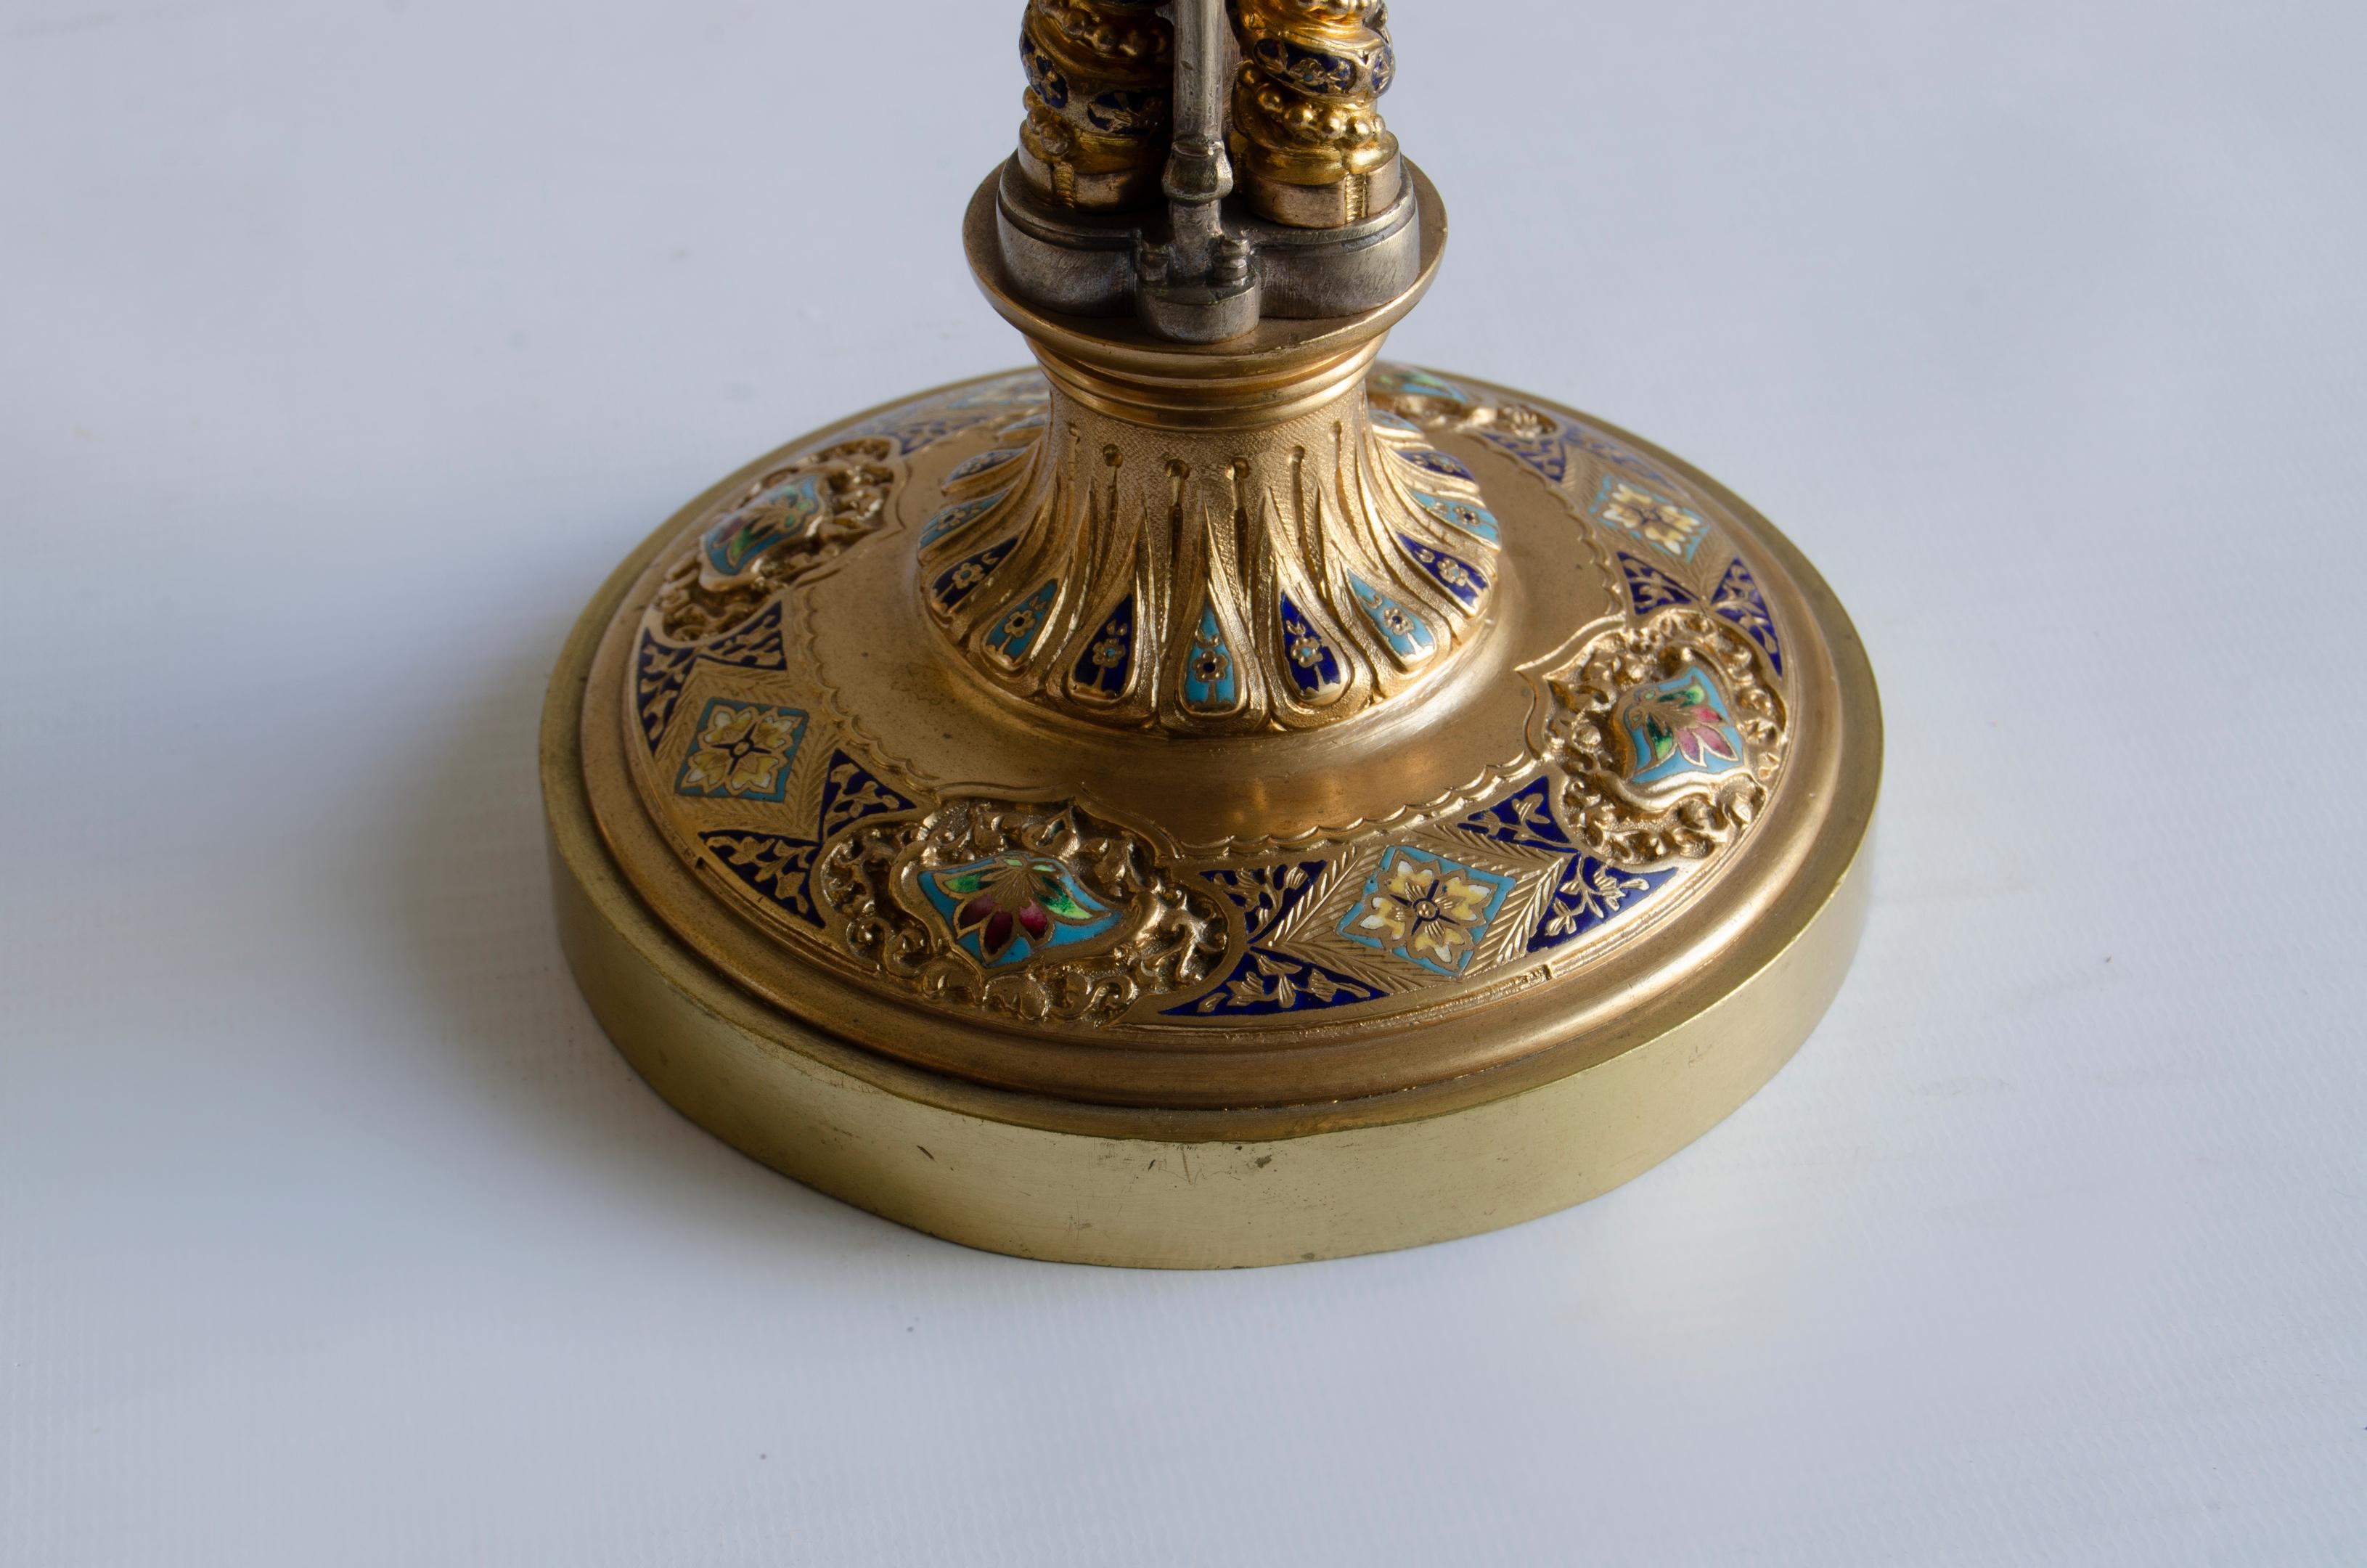 A pair of Napoleon III candlesticks
gilt bronze and Champleve enamel
Origin France
19th century 1860
perfect condition.
The Napoleon III style had its heyday during the 1850s and 1880s. Emperor Napoleon wanted to emulate the lavishness and elegance